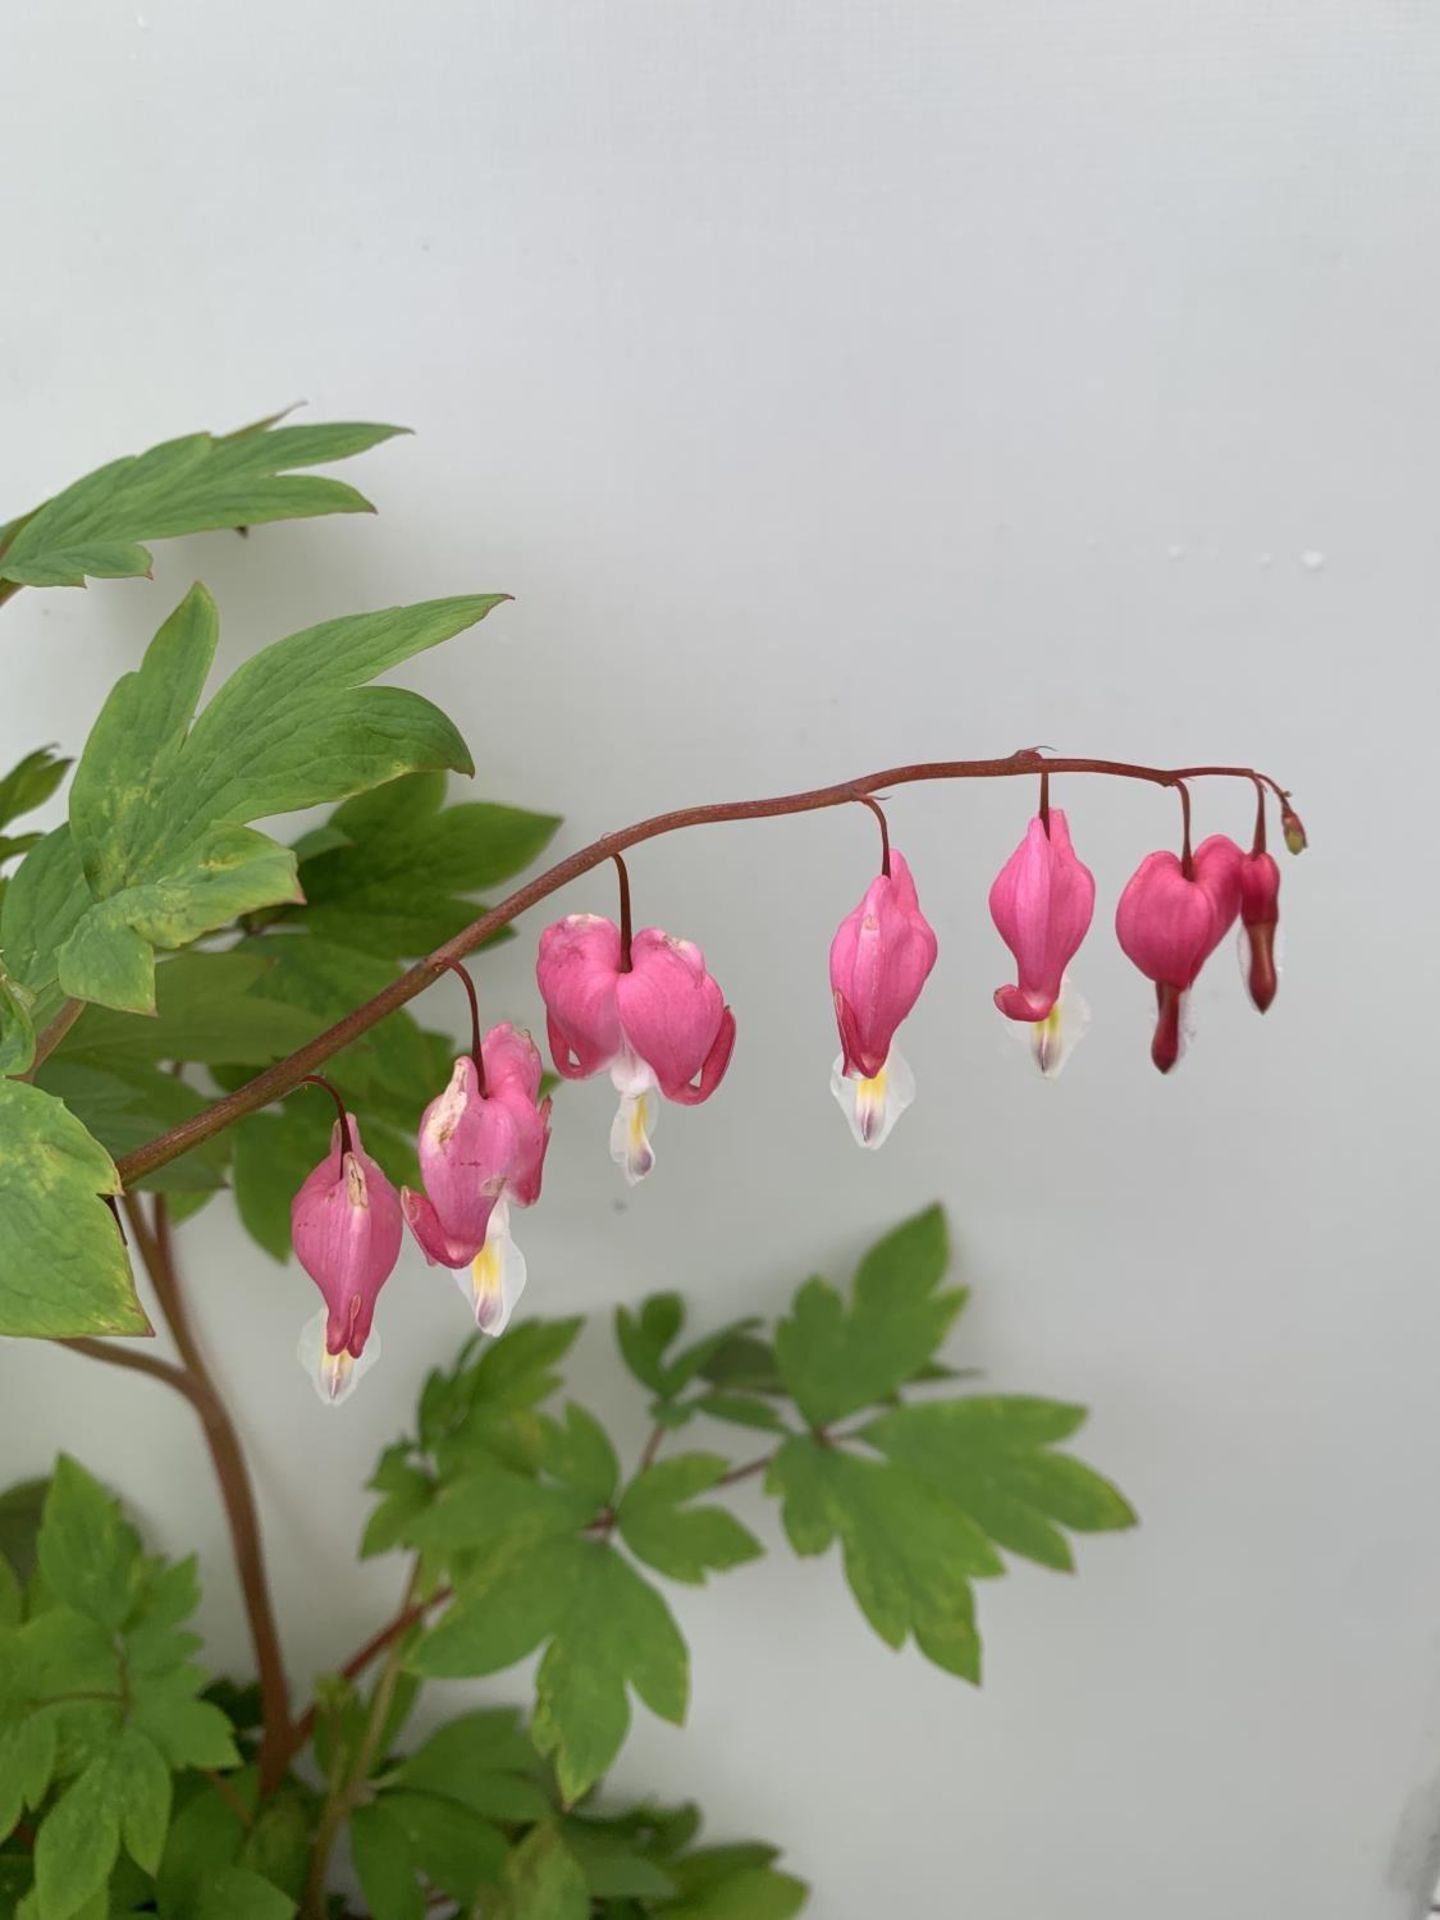 SIX DICENTRA SPECTABILIS BLEEDING HEART 50CM TALL IN 2 LTR POTS TO BE SOLD FOR THE SIX PLUS VAT - Image 6 of 9